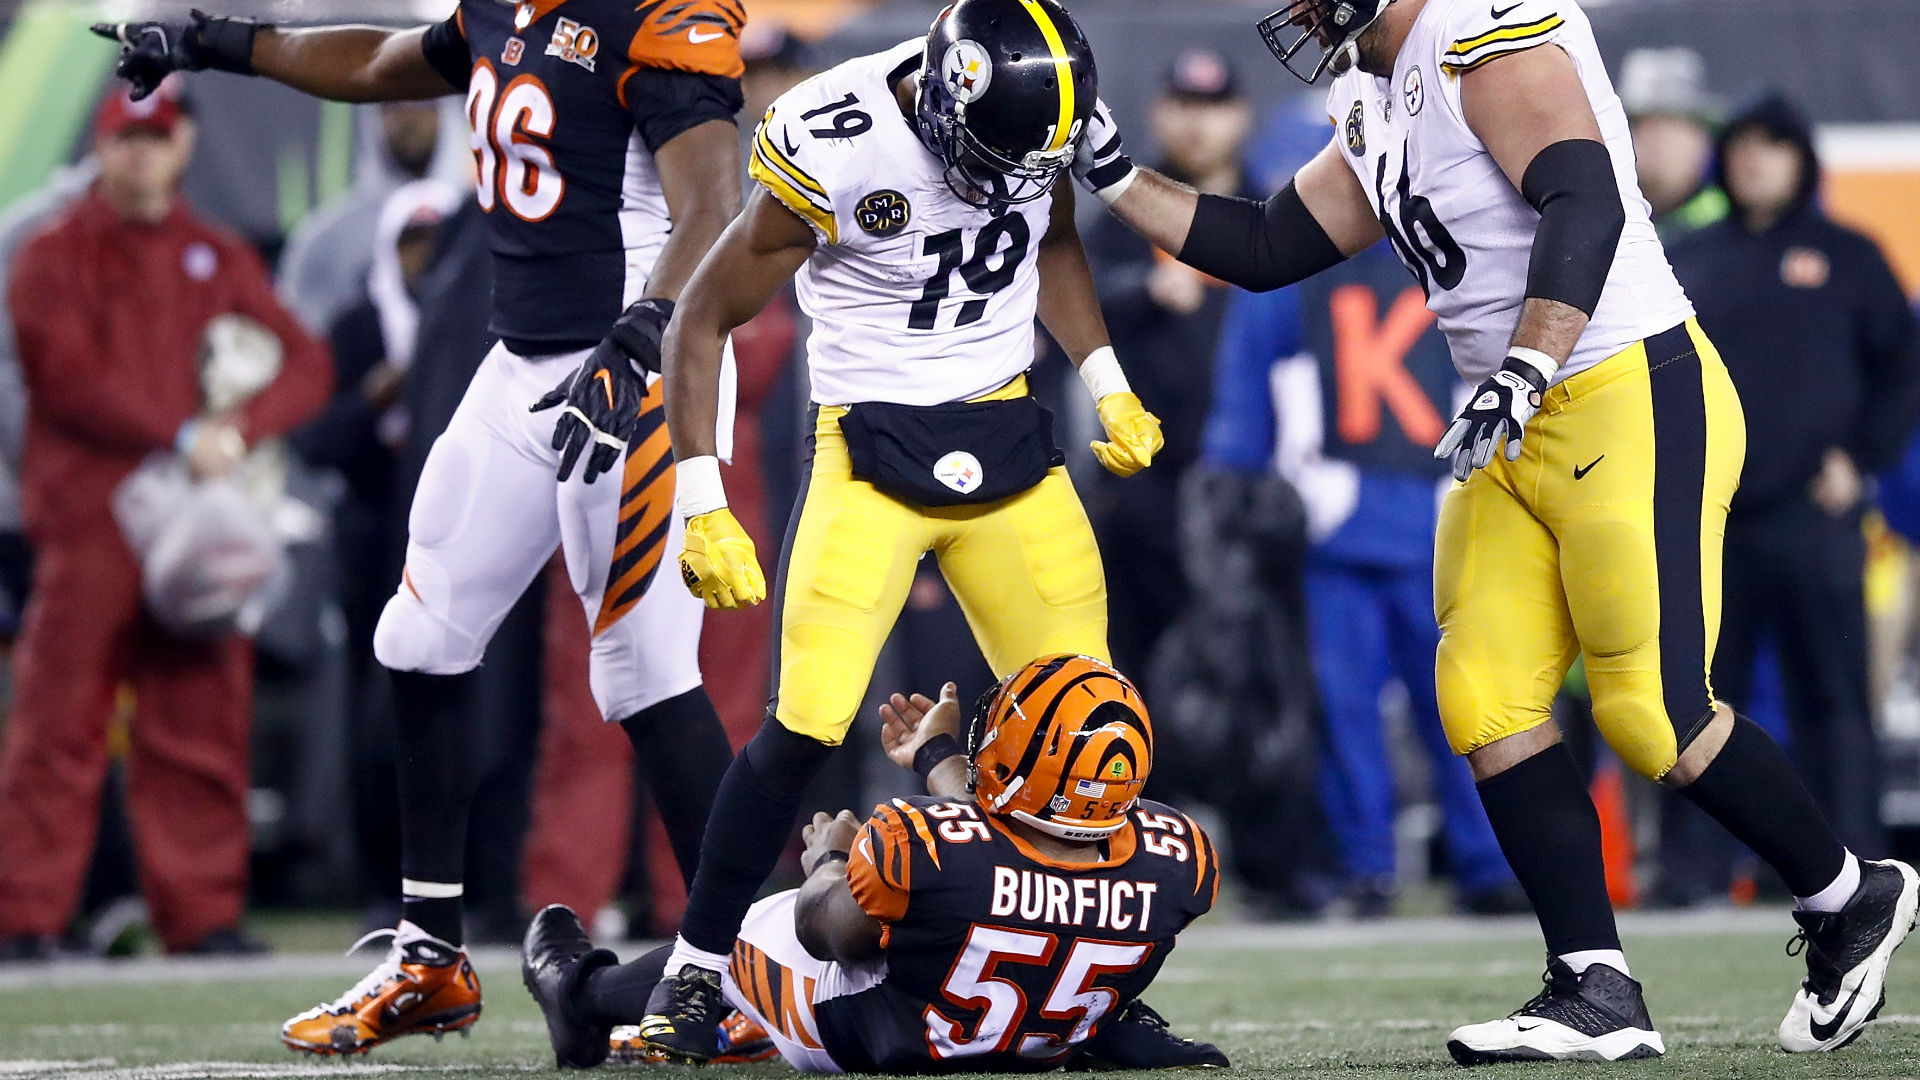 NFL's bad Steelers-Bengals suspension judgment obstructs justice for worse offenses